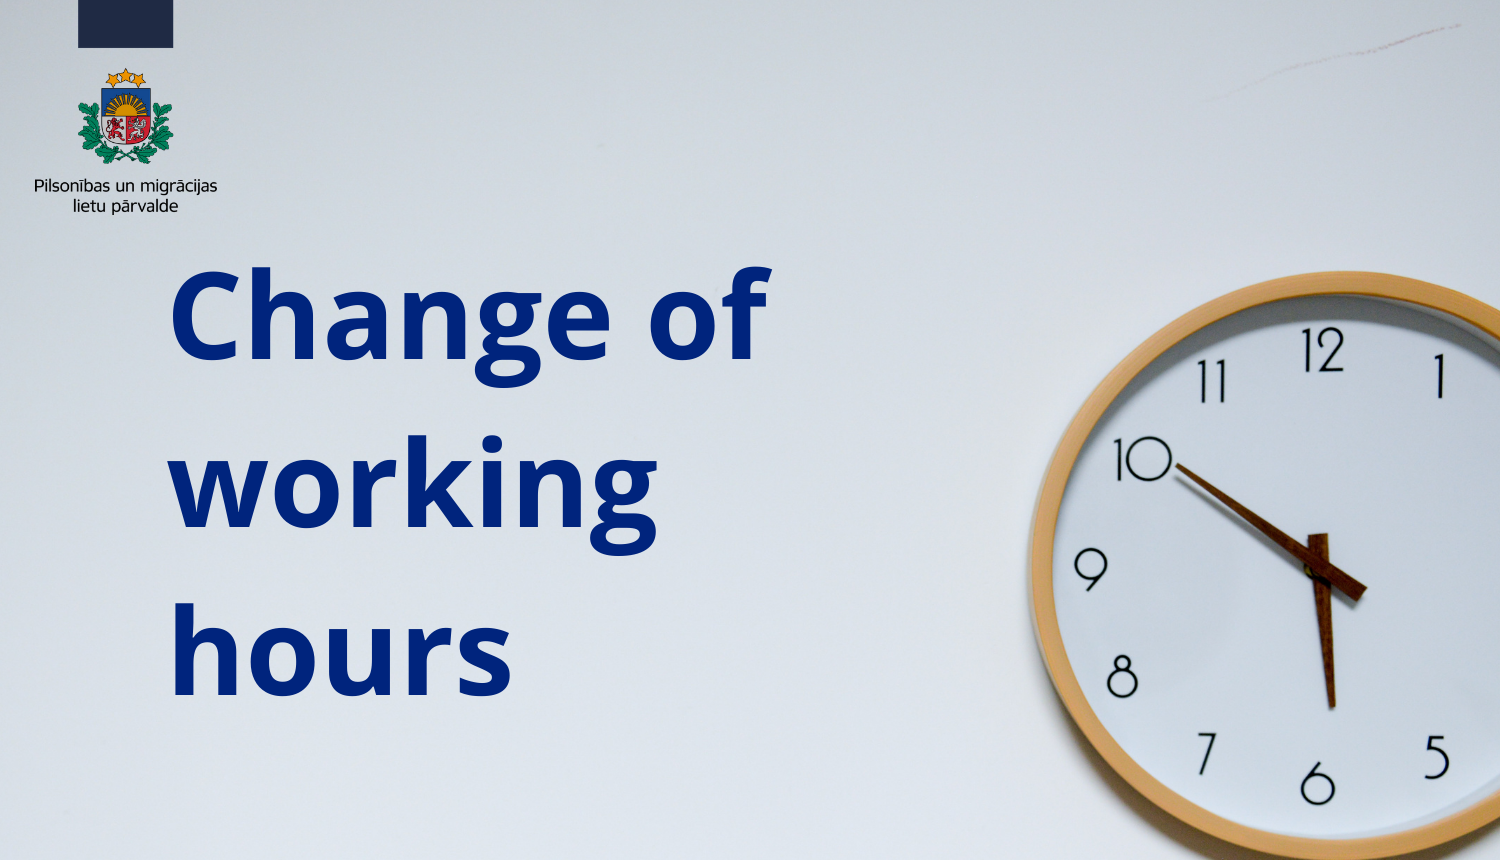 Text: Change of working hours. Wall clock